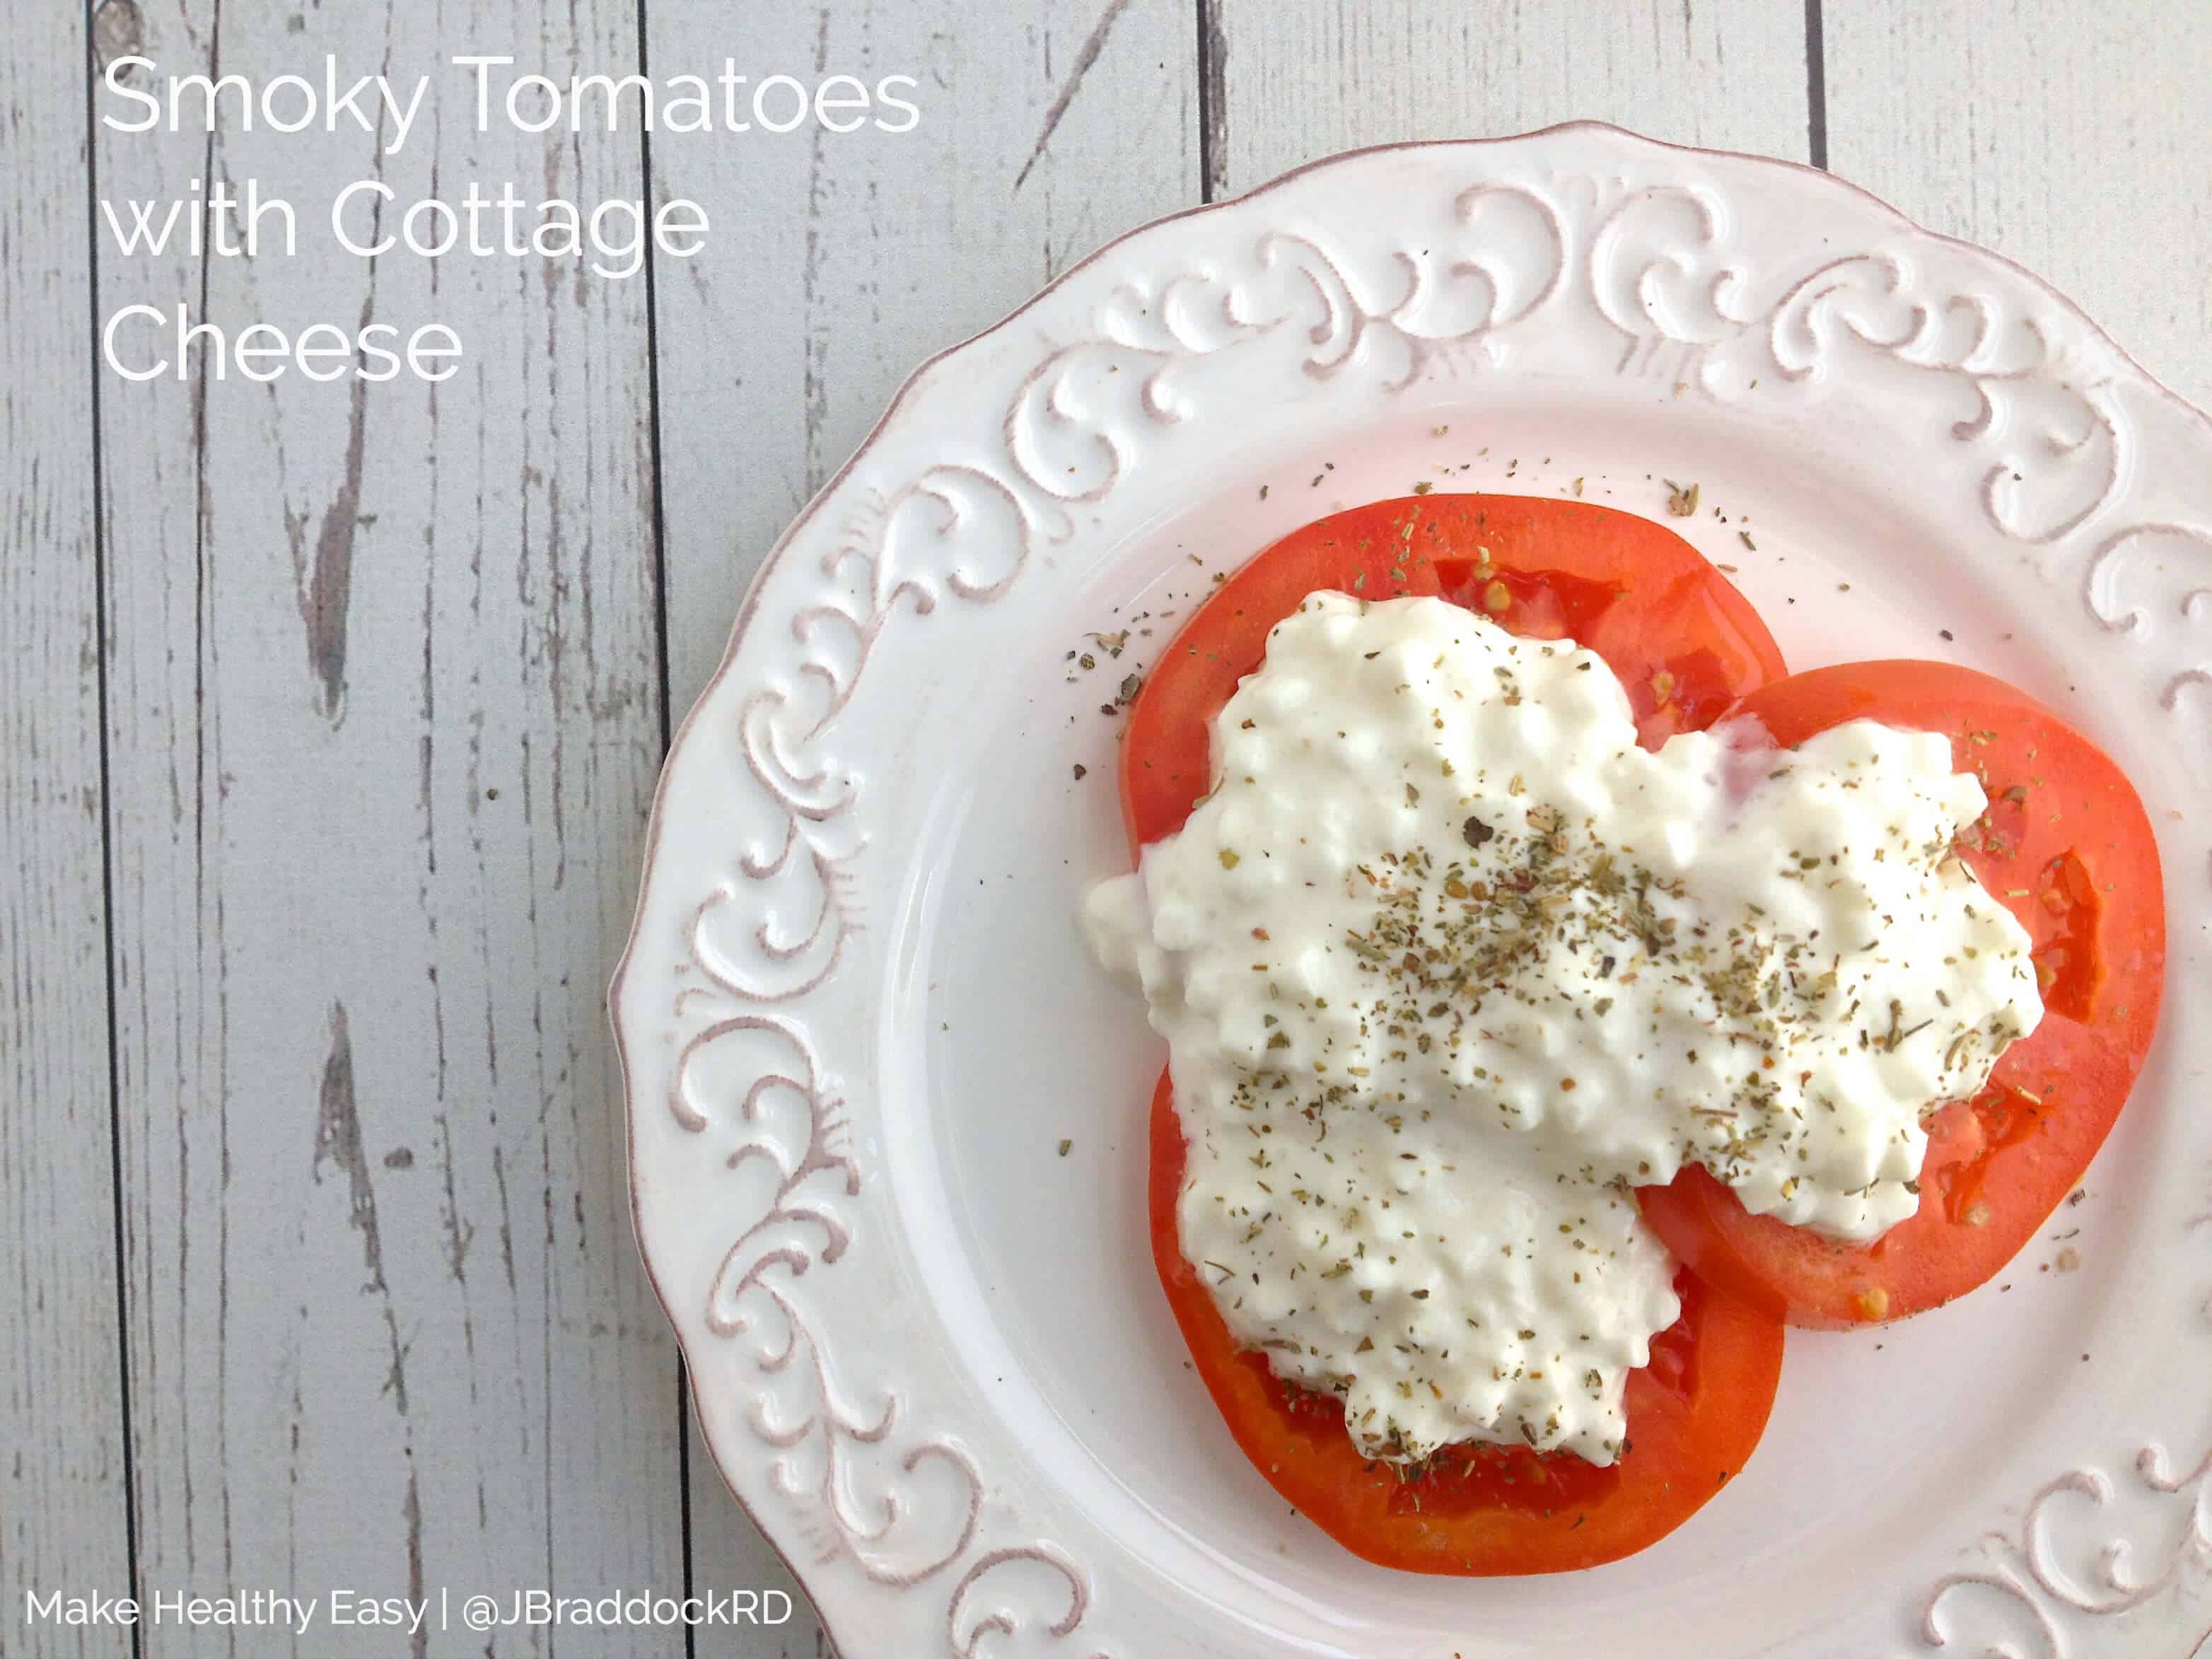 Simple Healthy Snacks Smoky Tomatoes With Cottage Cheese